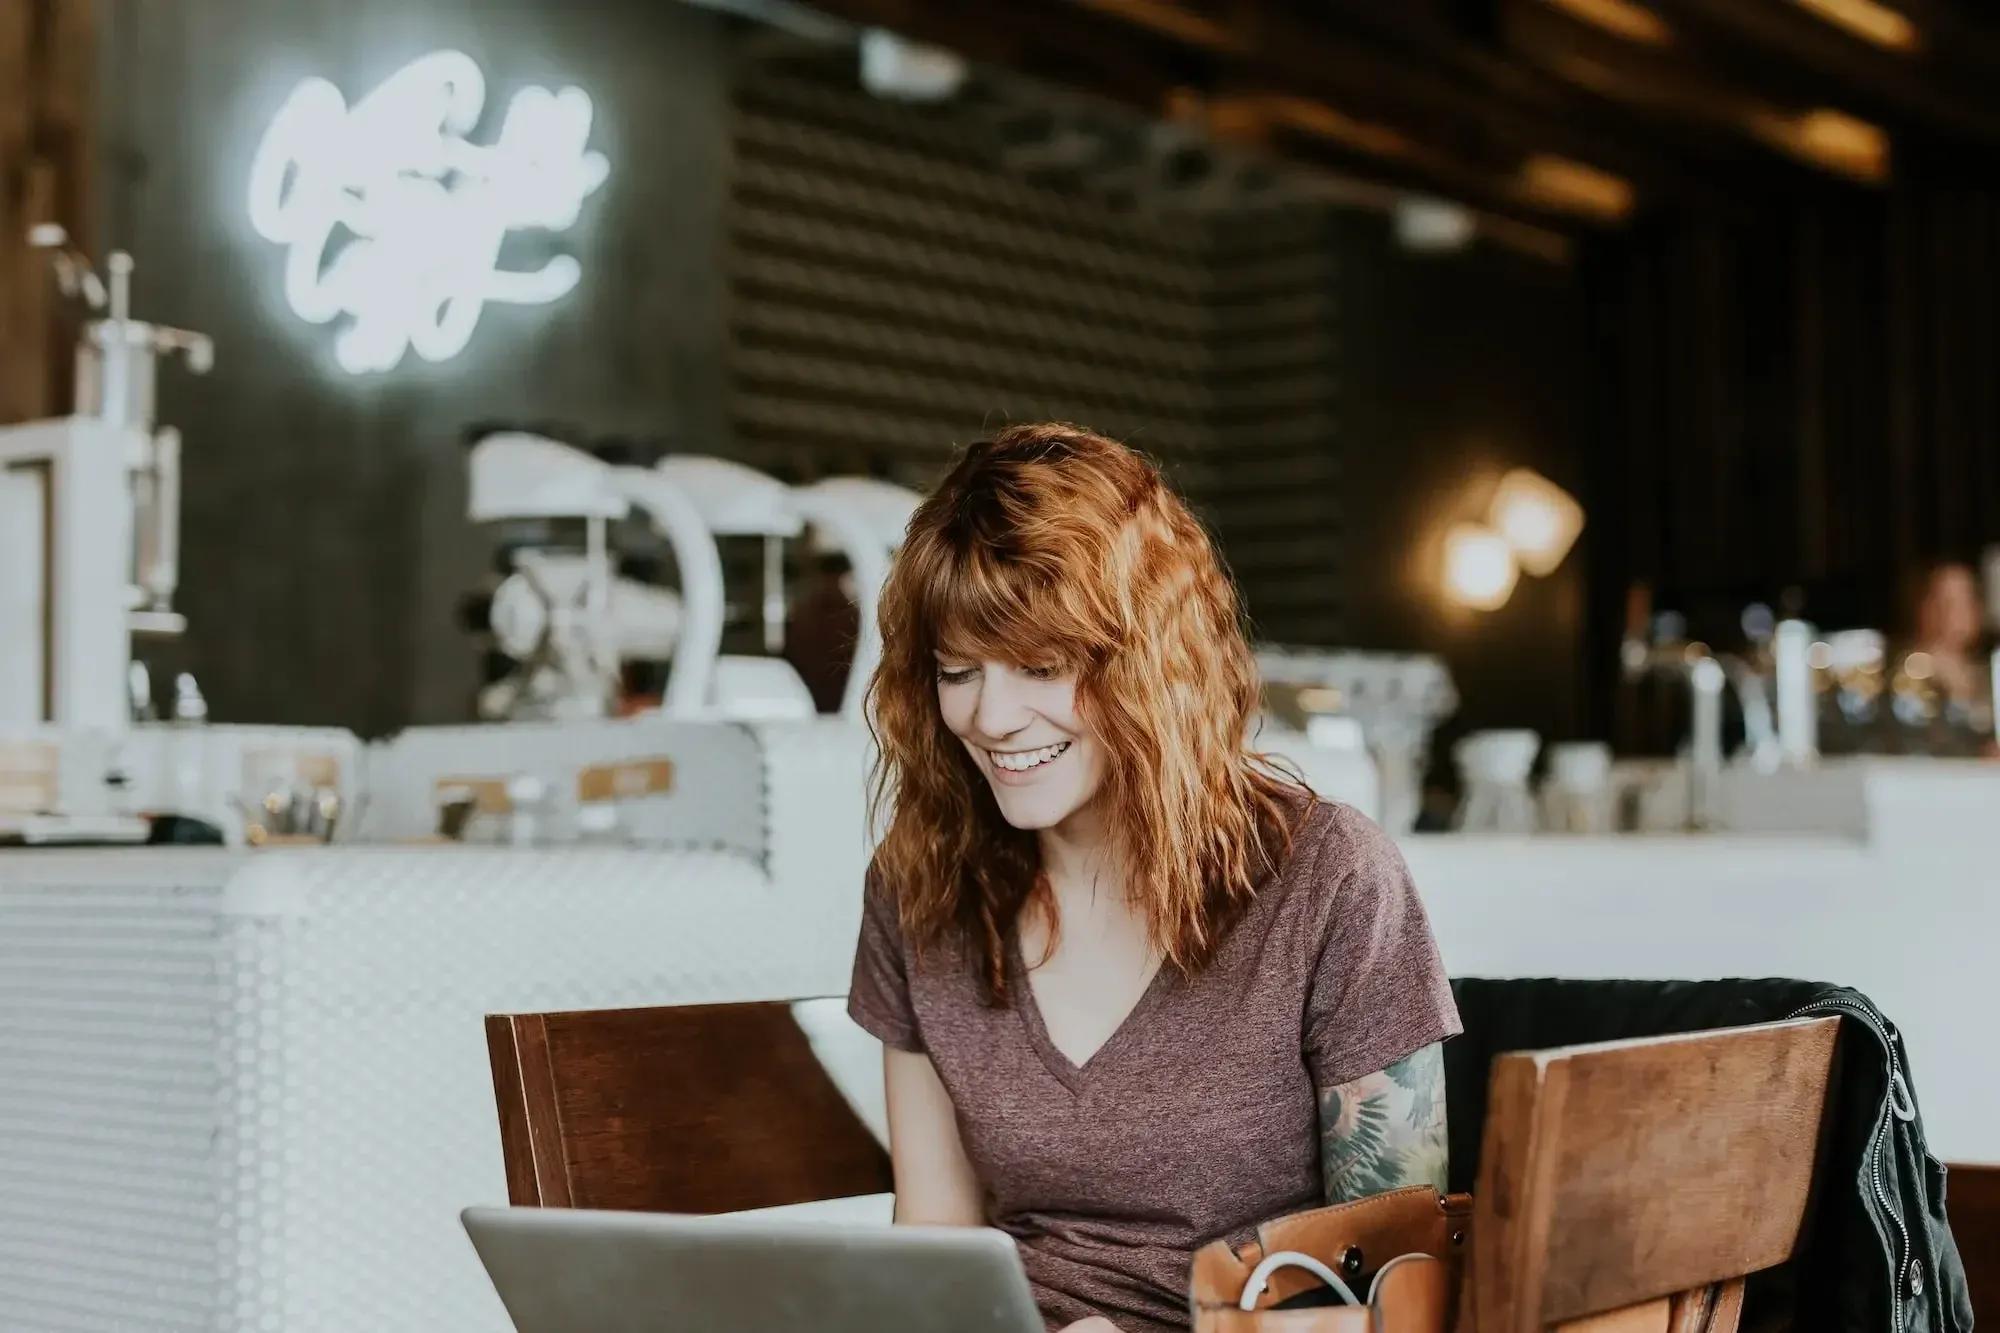 Smiling woman with red hair and tattooed arm sitting in a cafe, having a virtual meeting.